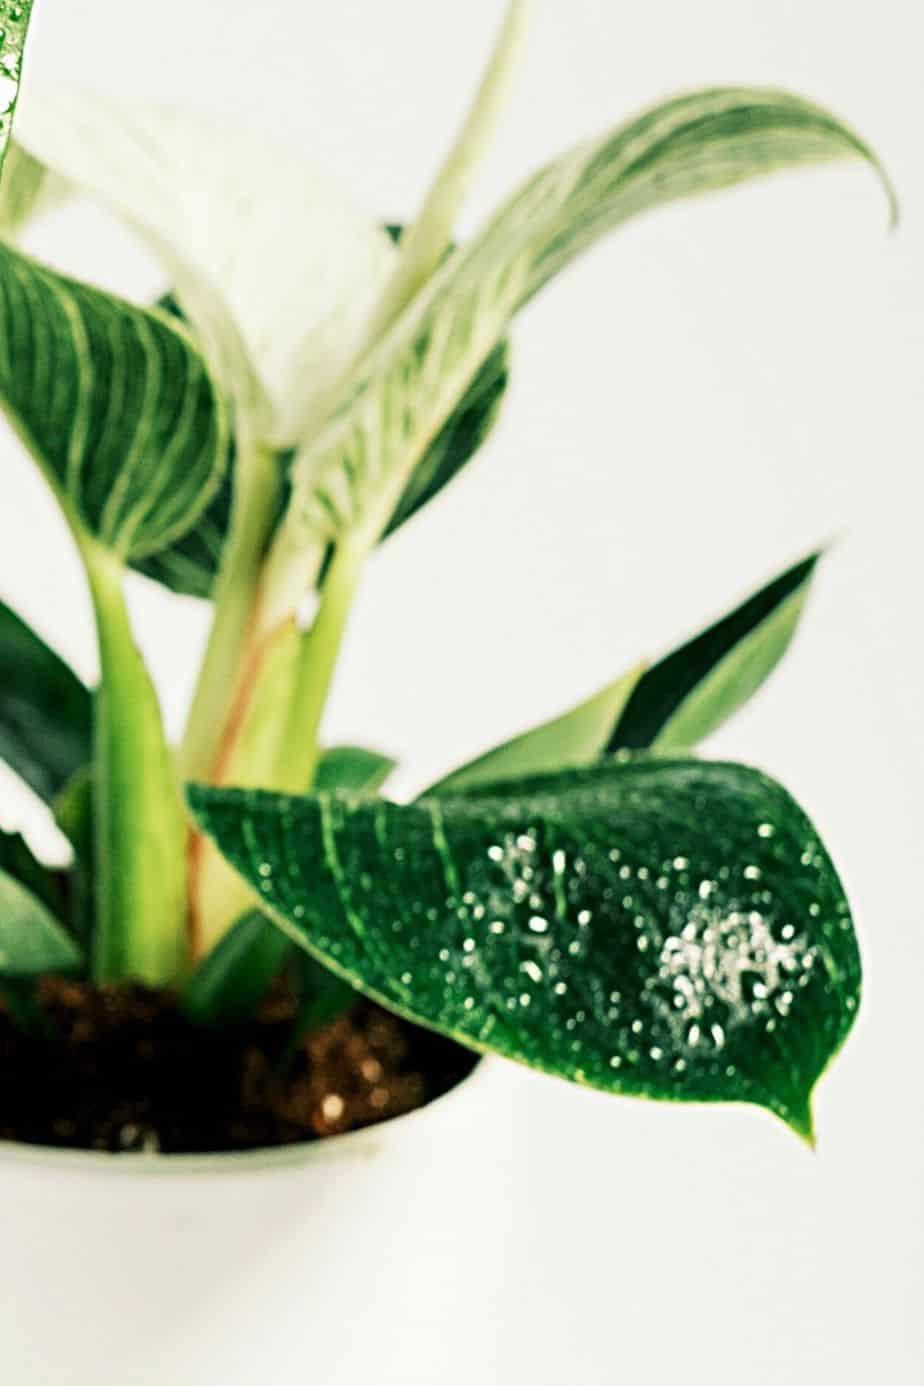 Water your Philodendron Birkin according to schedule to avoid stunting and root rot problems